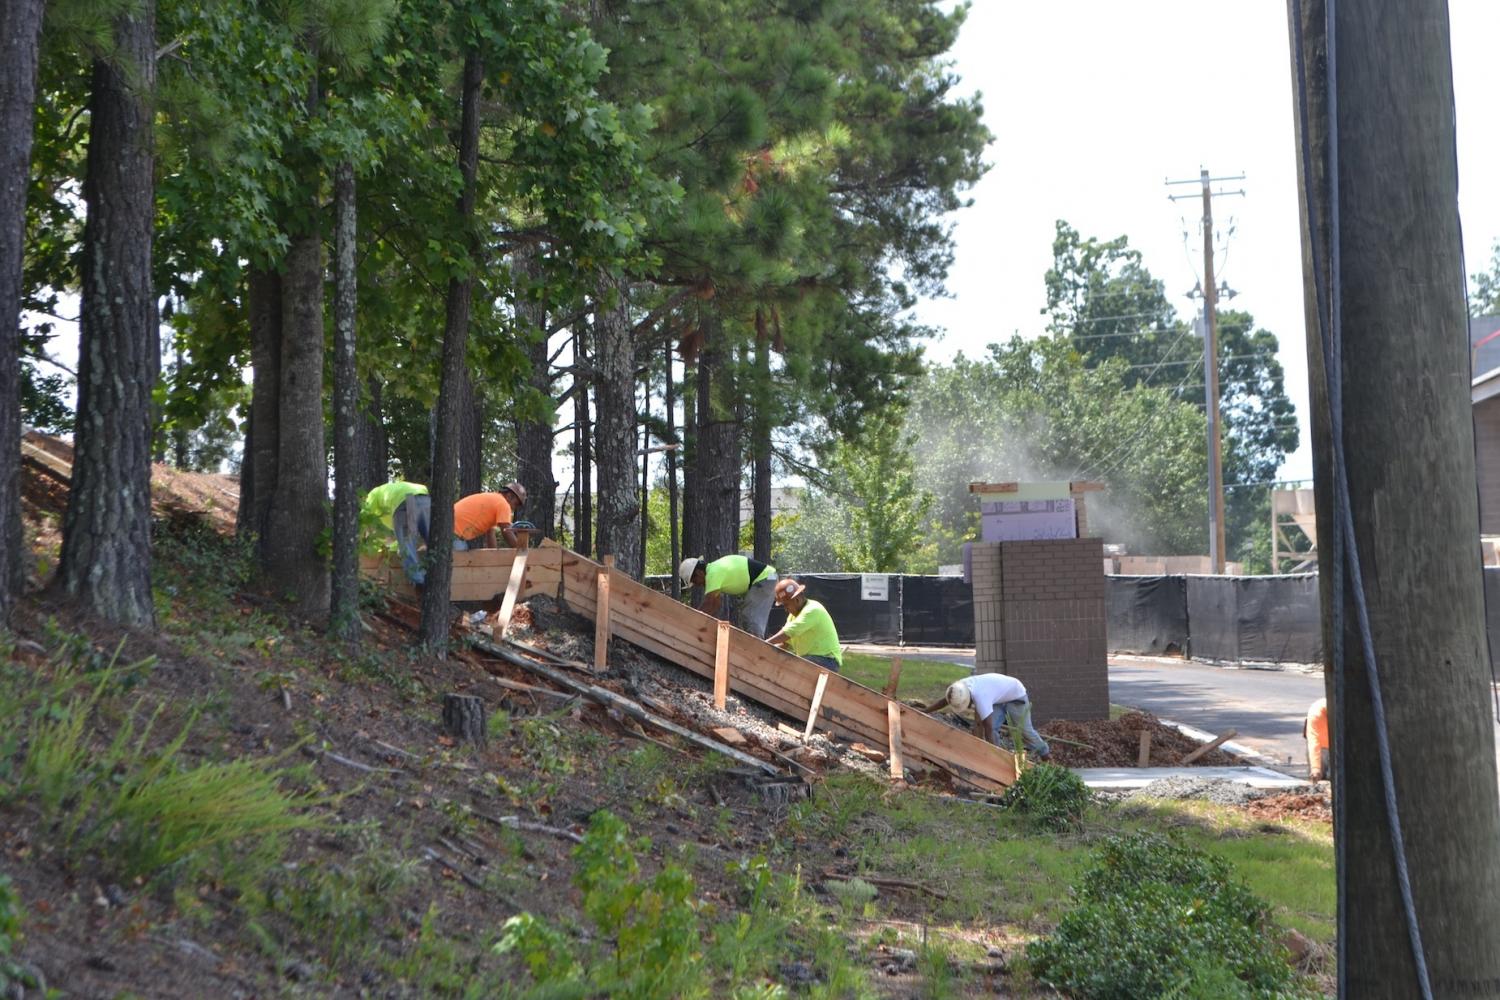 A new set of stairs at the bus ports has begun as construction of the new theater continues at North Cobb. Leza Aldrige, a counselor for 10-12 grade, estimates the end date of the construction will be April of next year. The new addition will allow more students to reach their buses faster, and will prevent overcrowding of the old staircase.